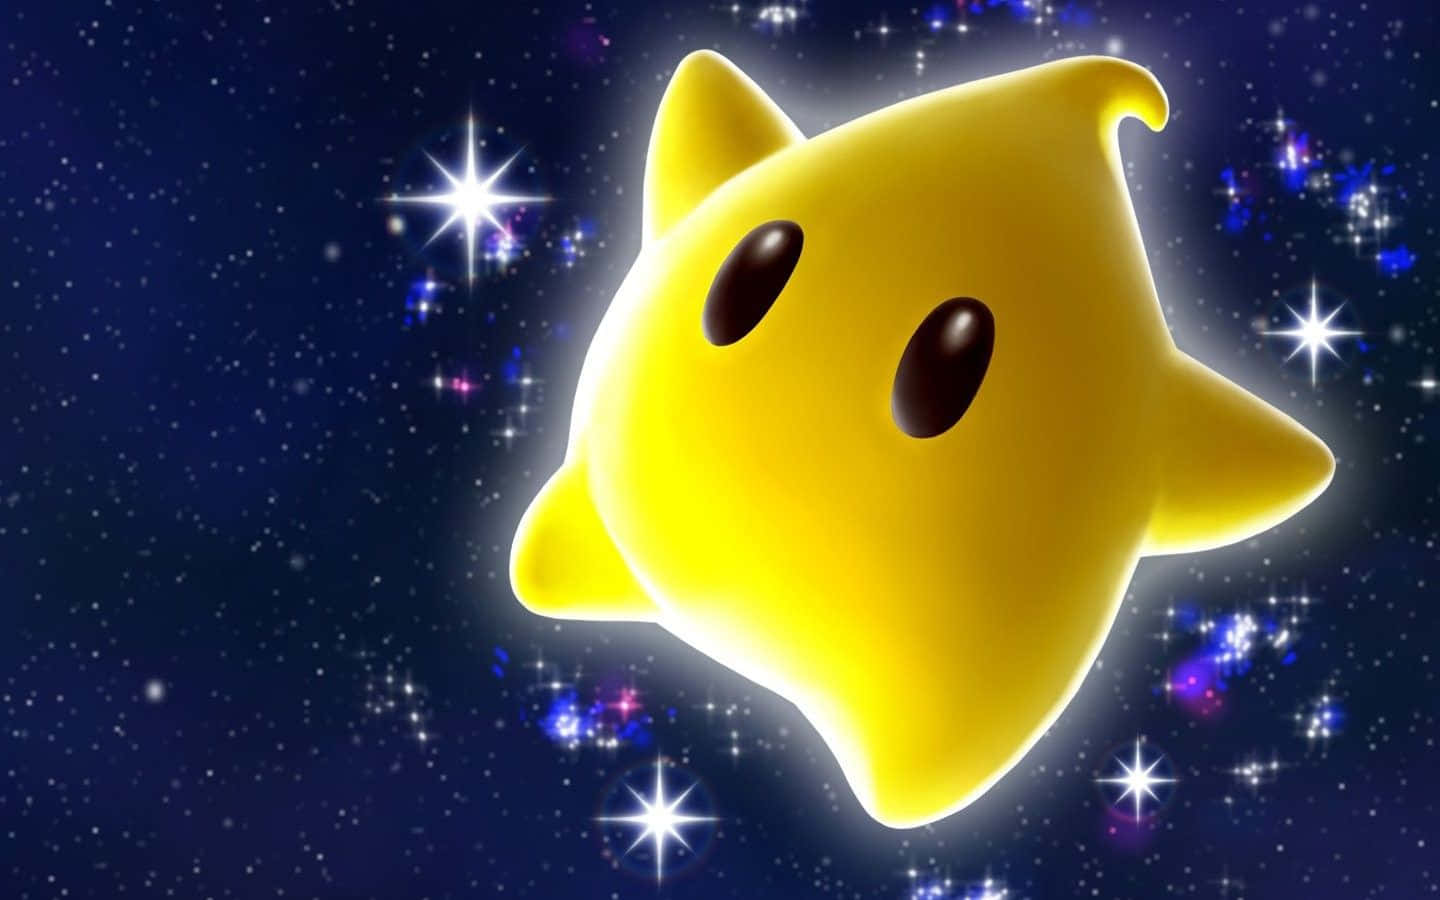 A Yellow Star In The Sky With Stars Wallpaper